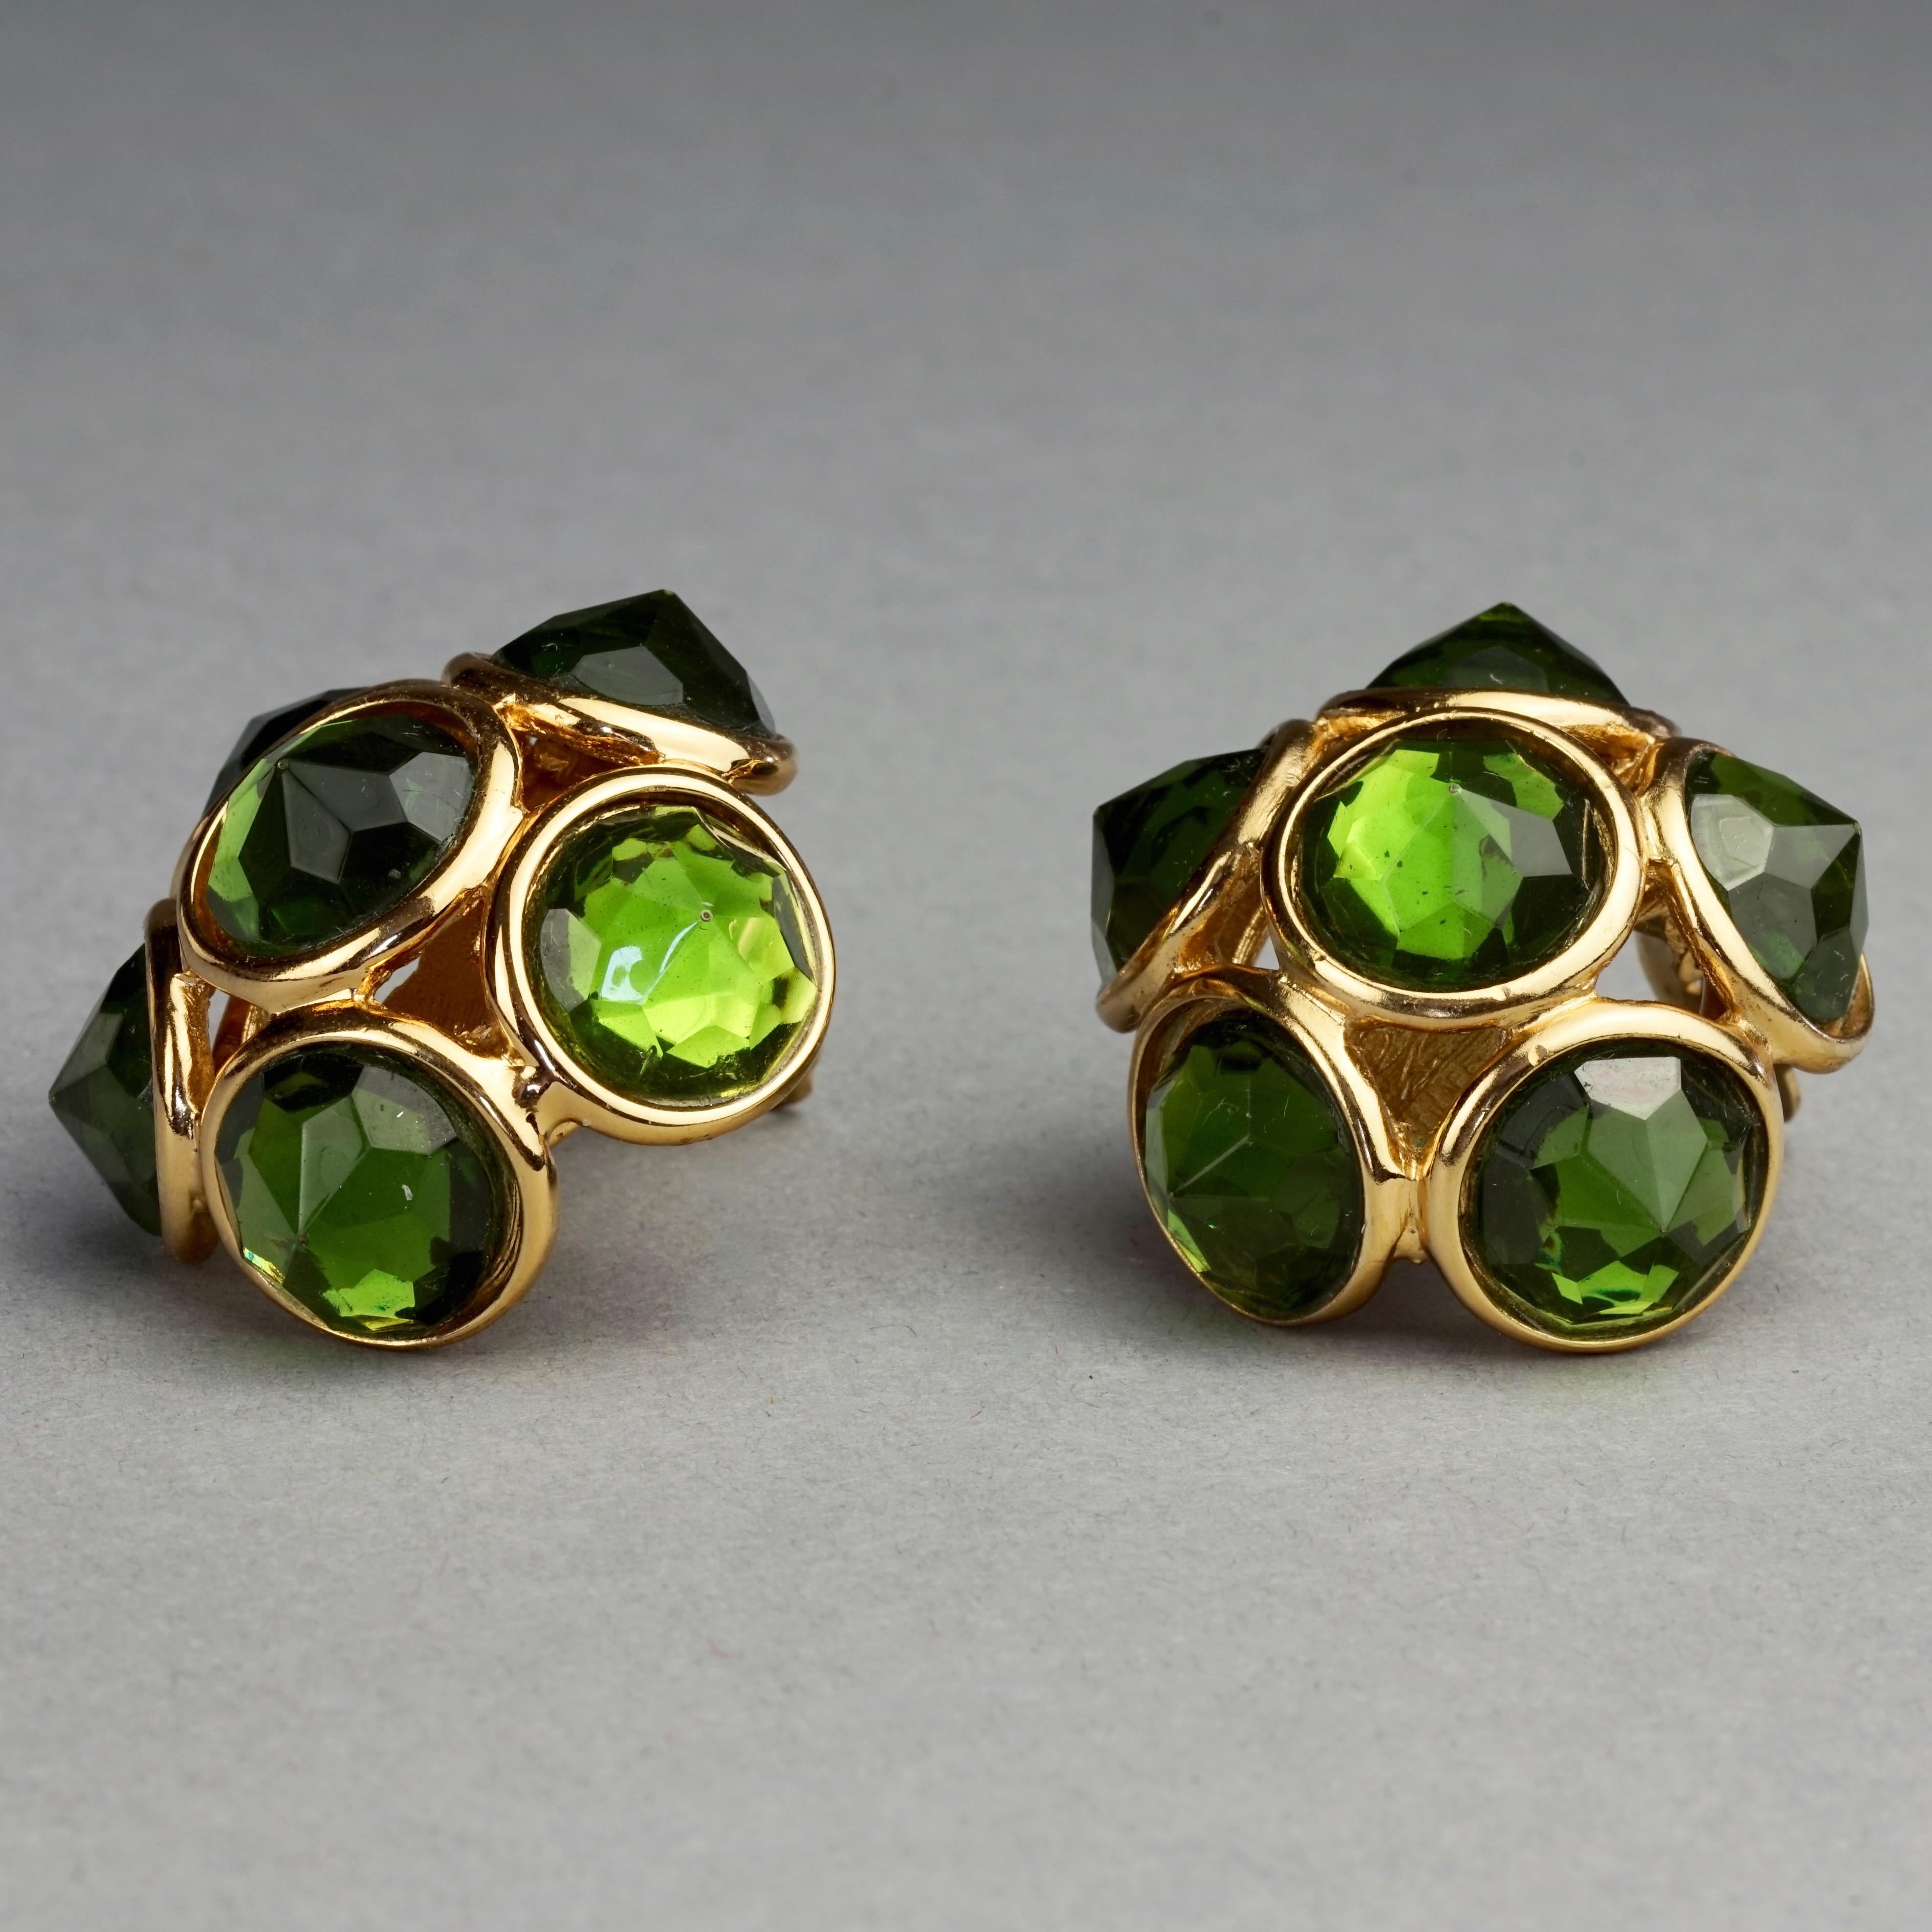 Vintage YVES SAINT LAURENT Ysl Flower Dome Green Rhinestones Earrings In Excellent Condition For Sale In Kingersheim, Alsace